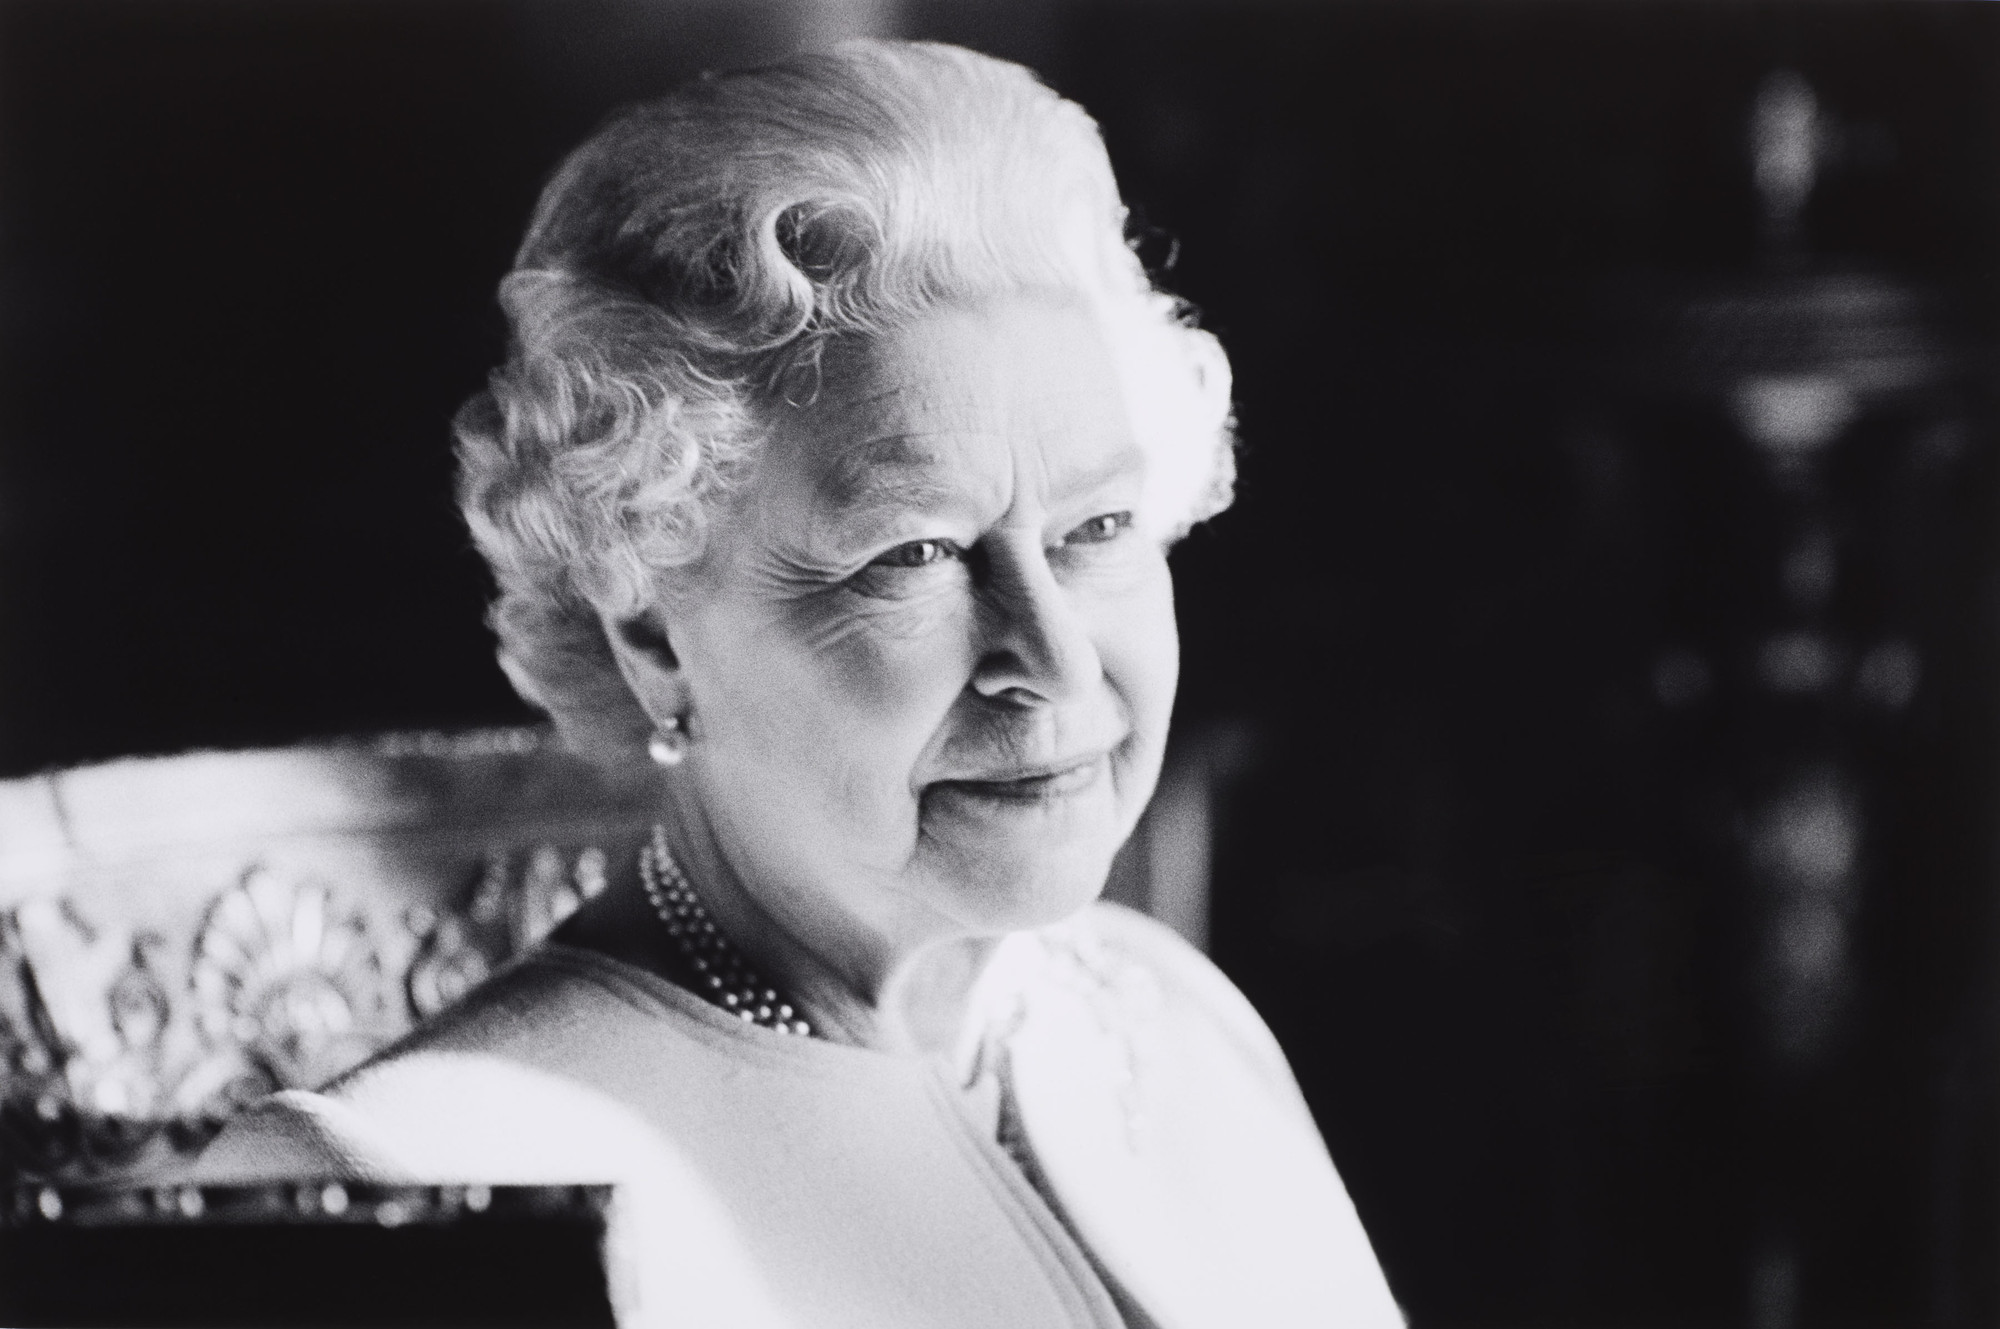 Tributes to Her Majesty The Queen, Elizabeth II 1926 – 2022